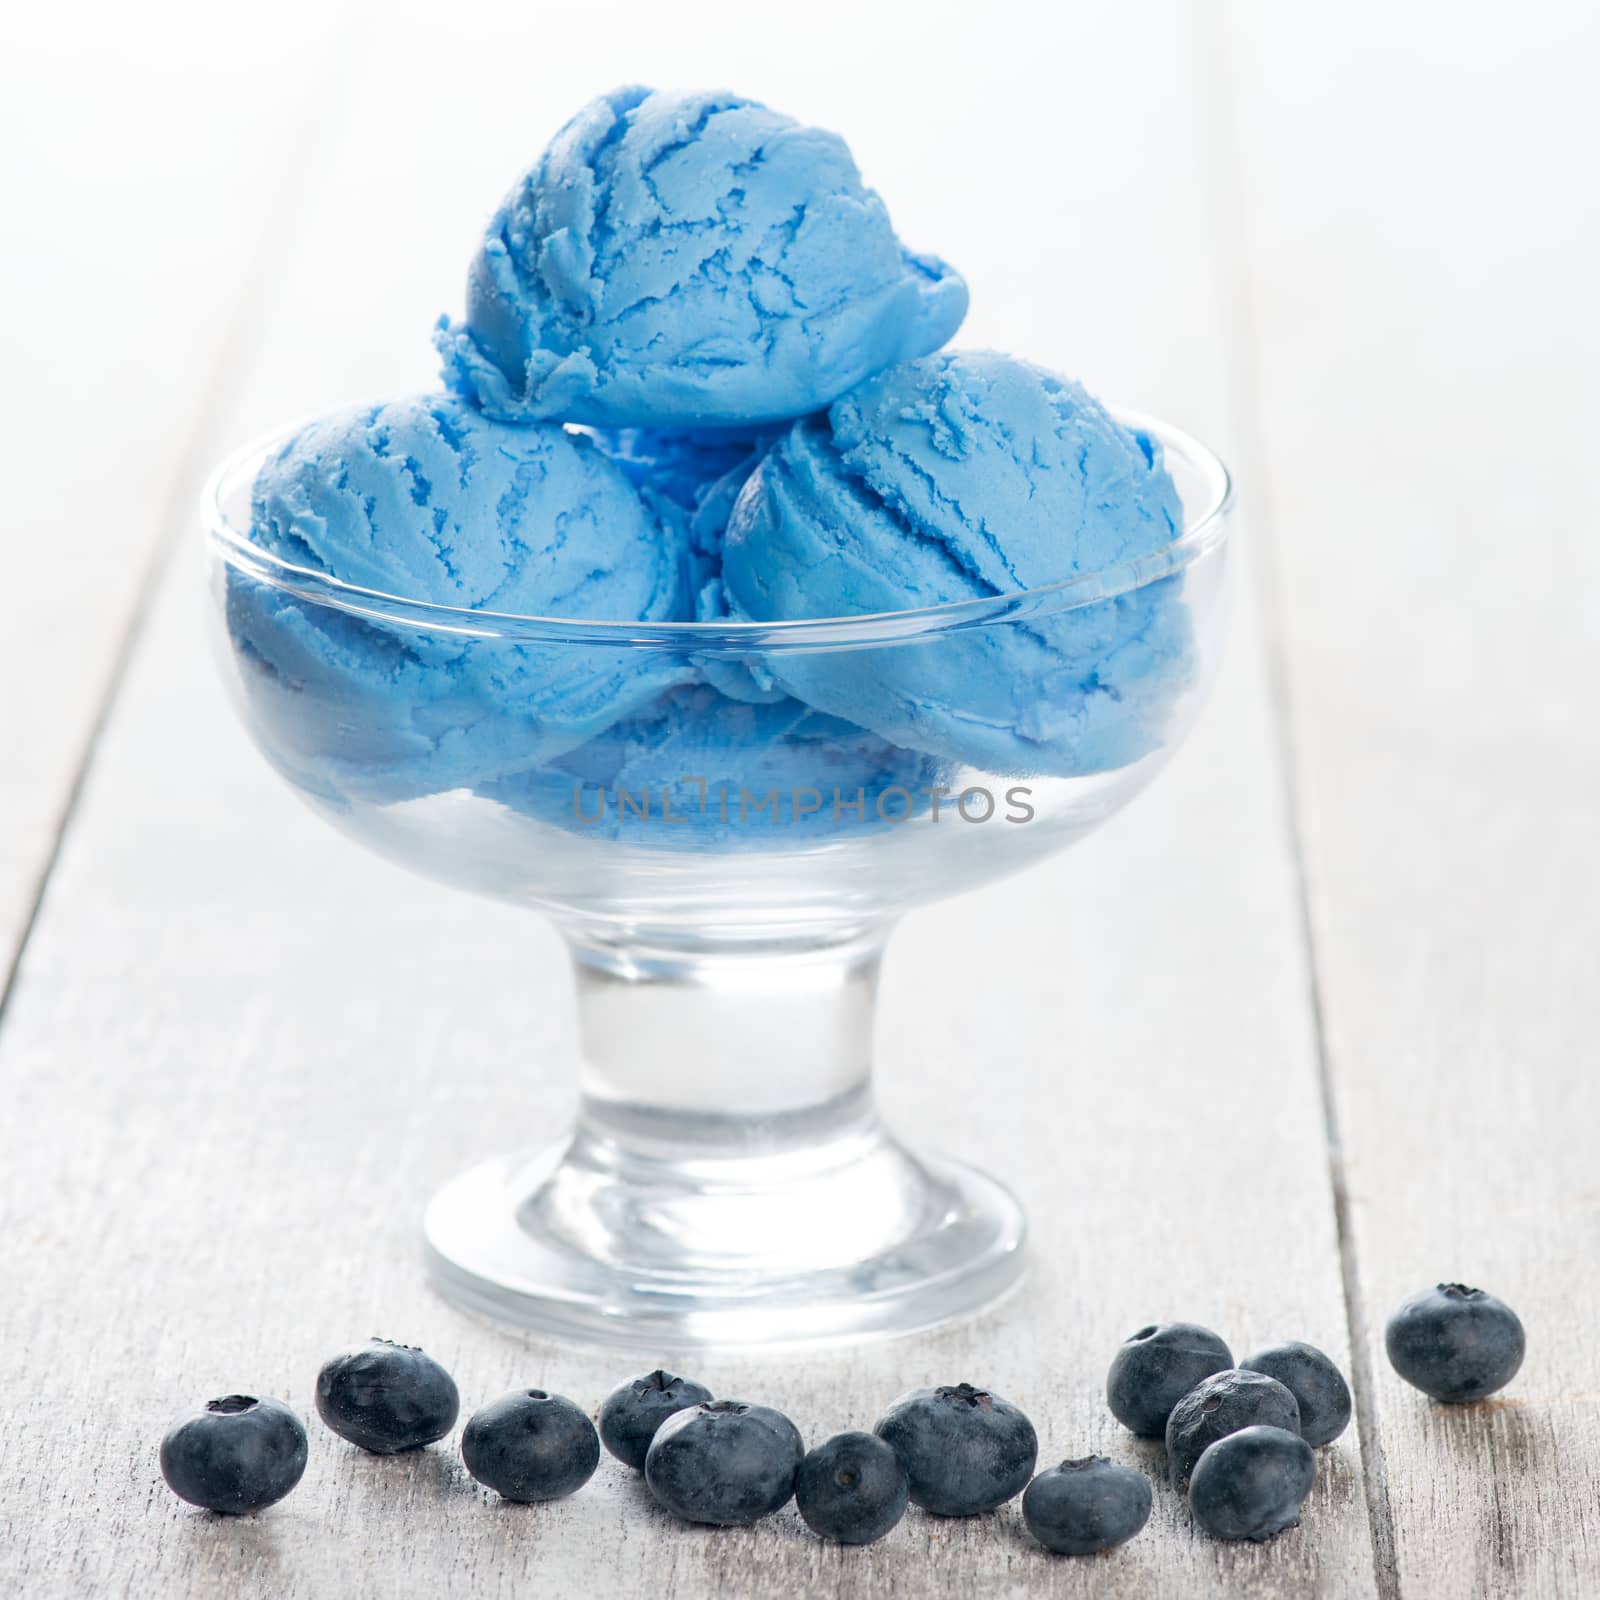 Blue ice cream in cup with blueberry fruits on wooden background.